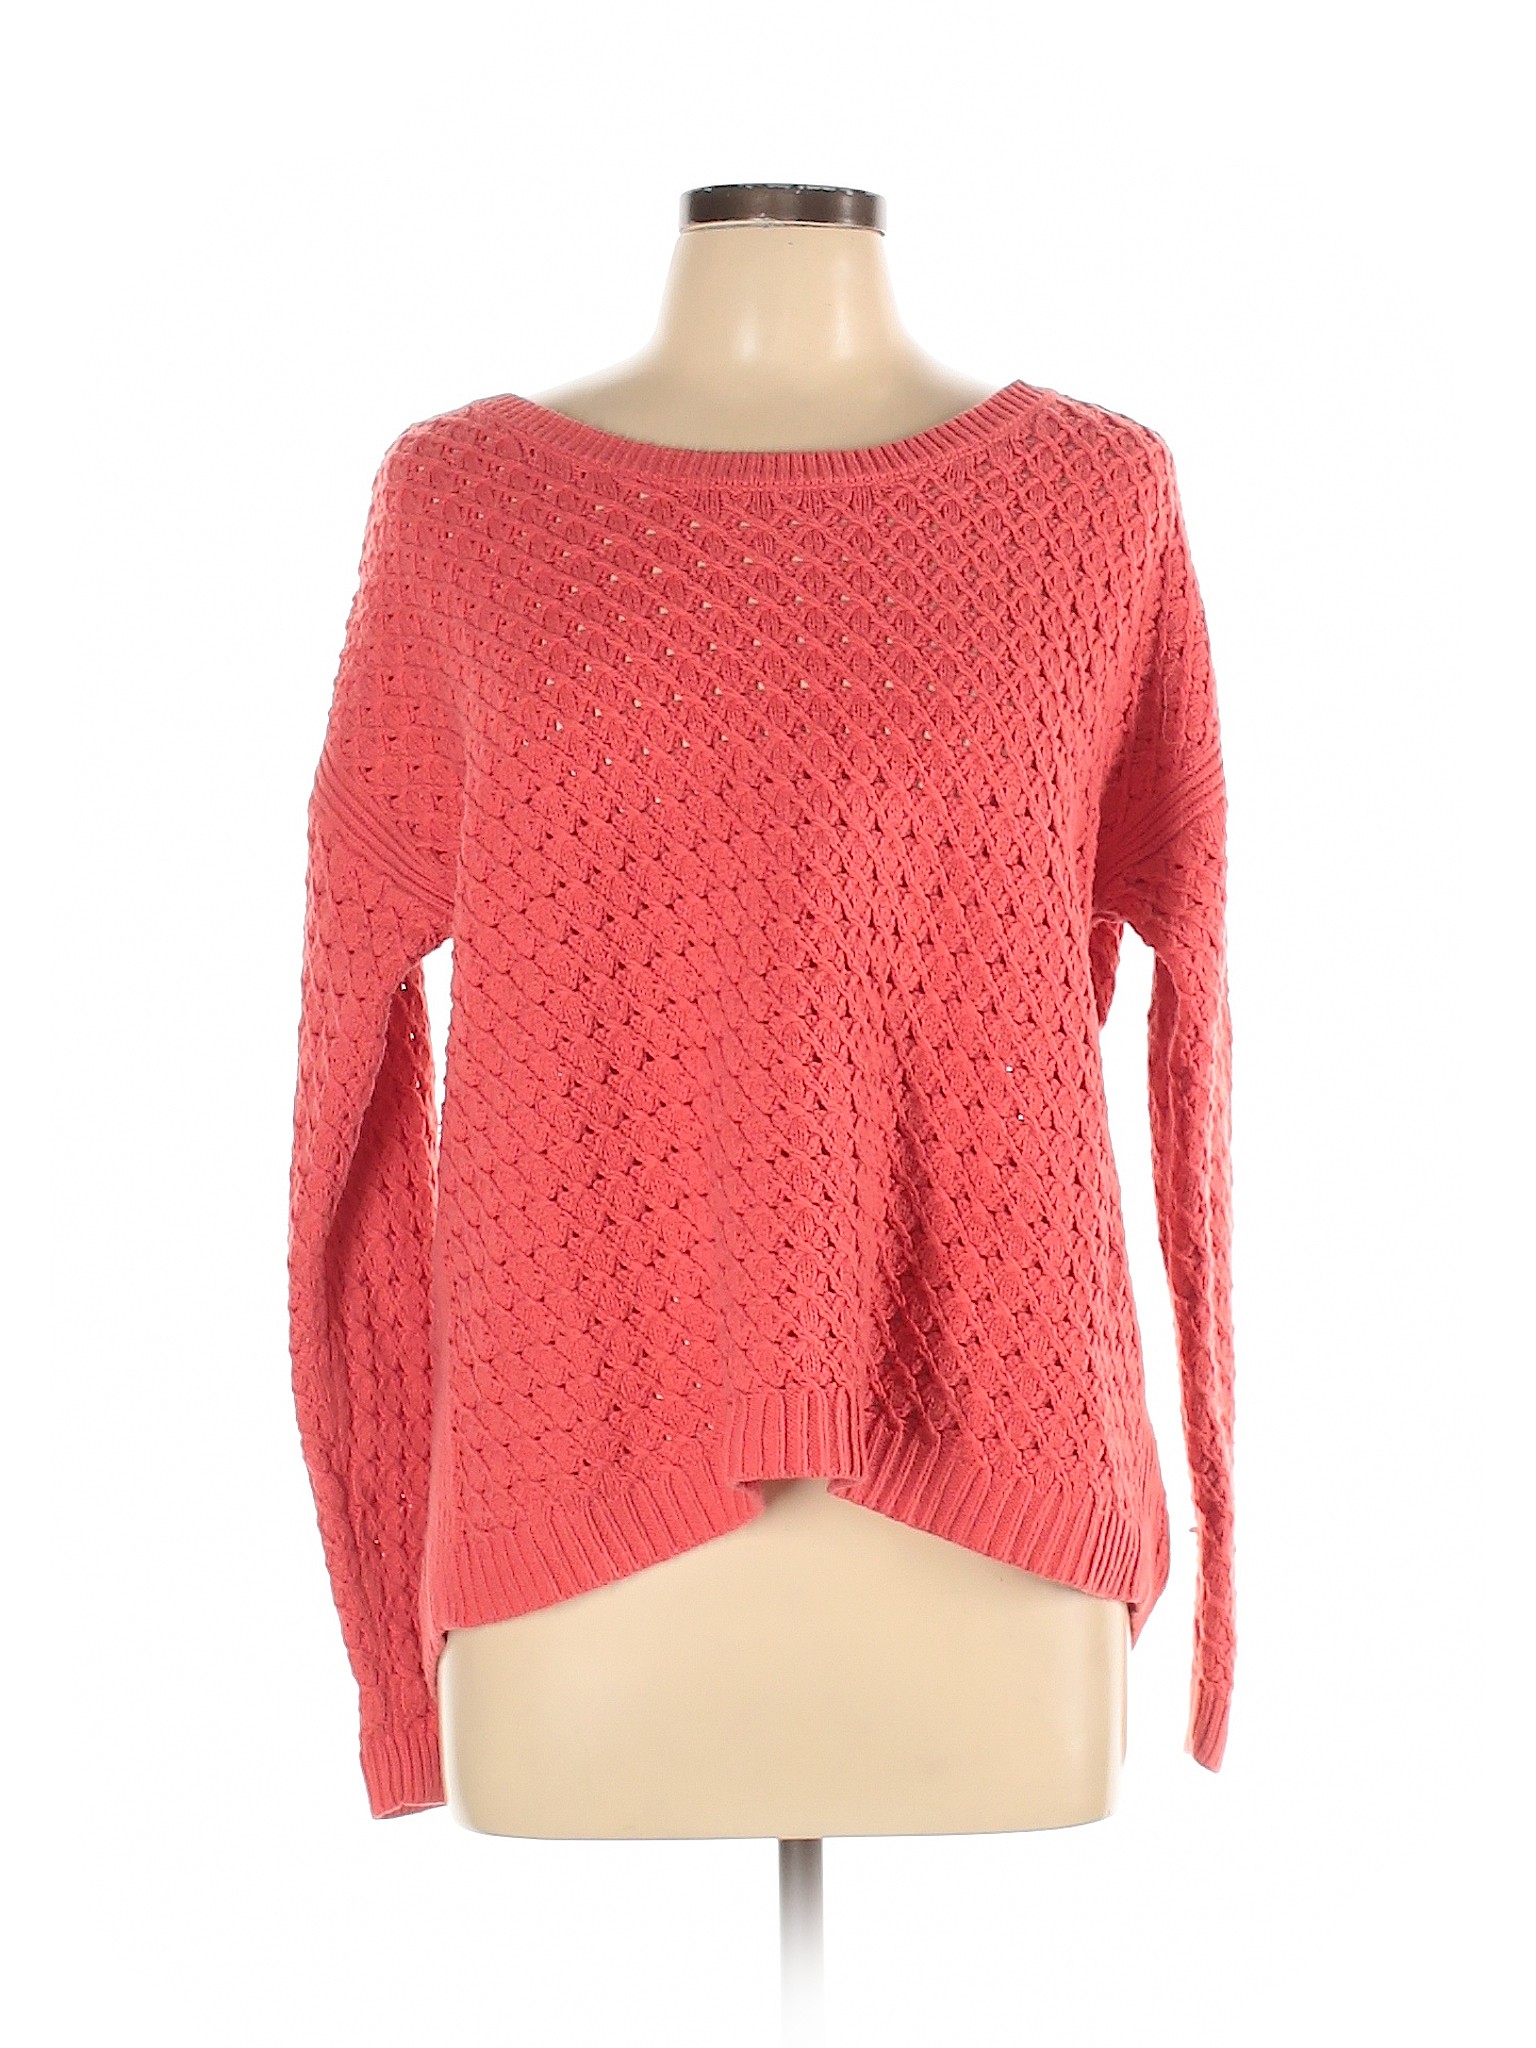 Old Navy Women Pink Pullover Sweater L | eBay